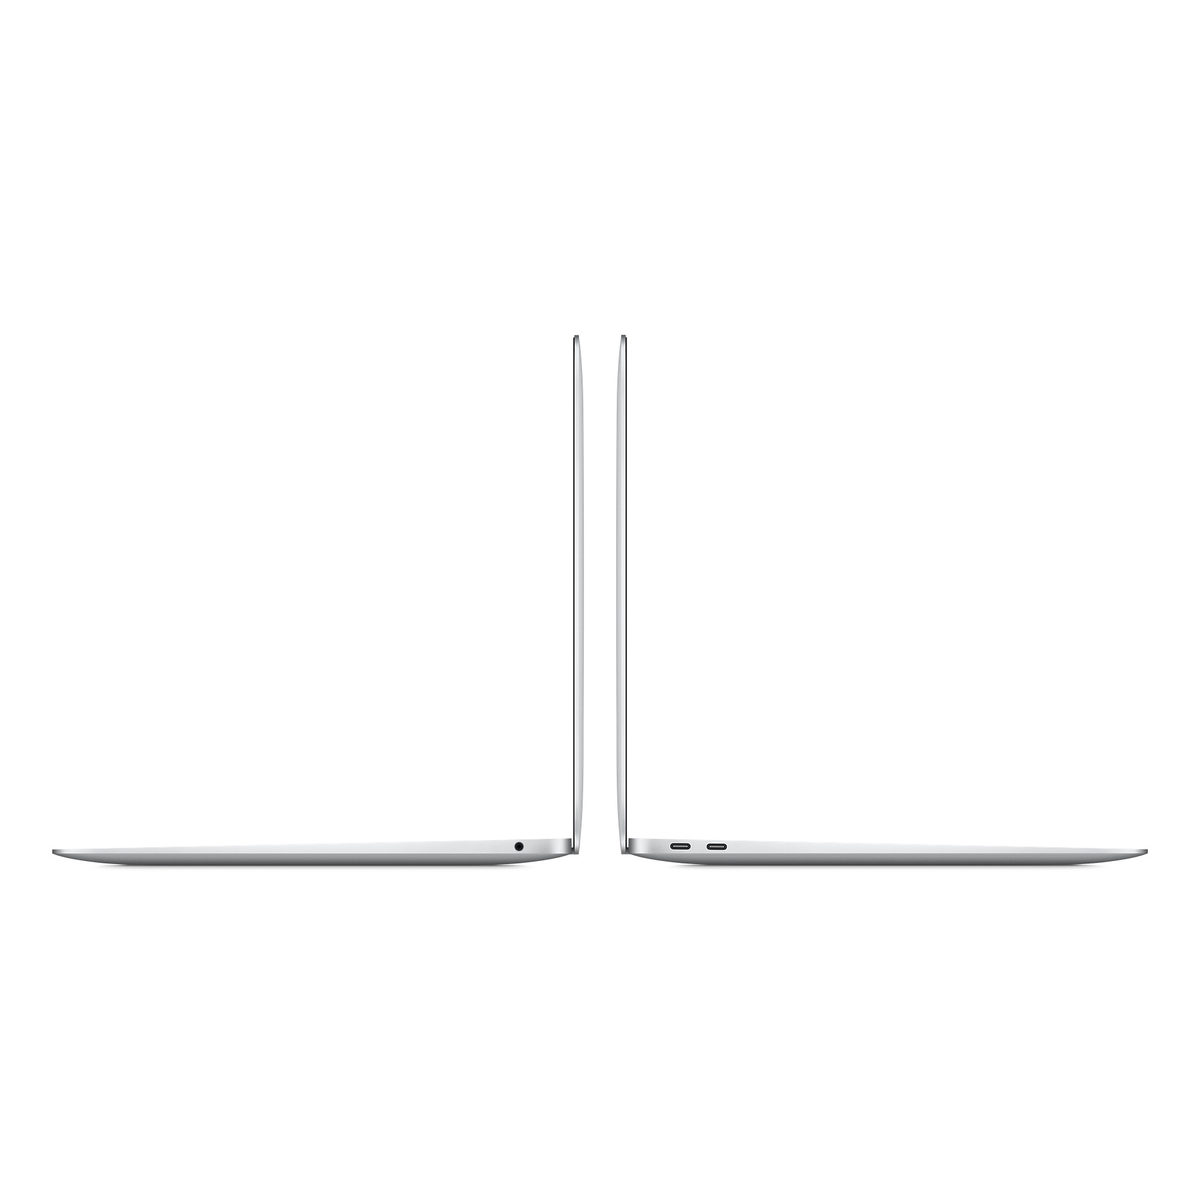 Apple MacBook Air 13"(MGNA3AB/A), Apple M1 chip with 8-core CPU and 8-core GPU, 512GB - Silver